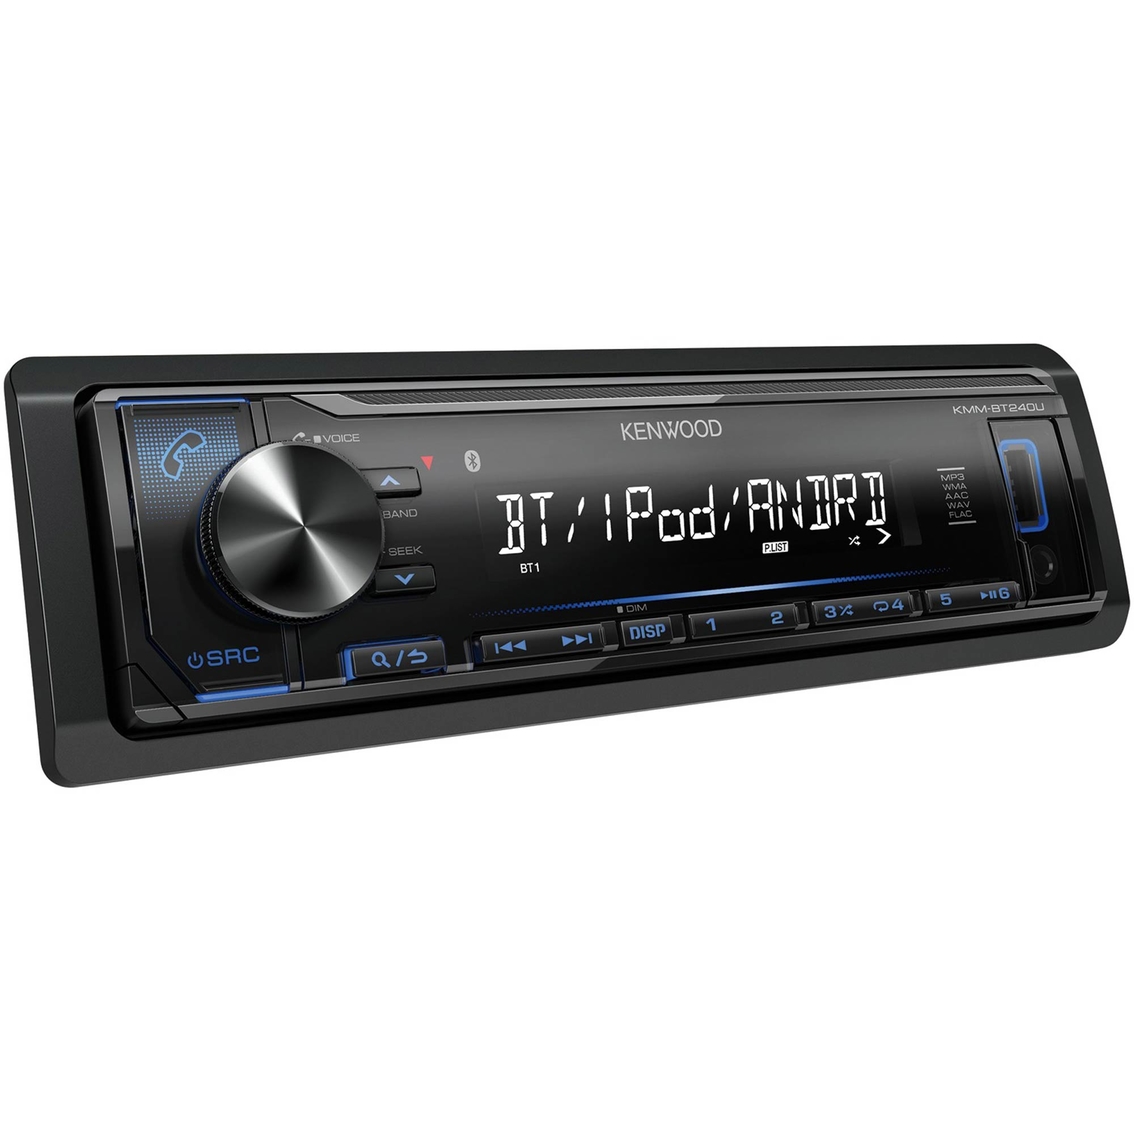 Kenwood Single-DIN In-Dash Digital Media Receiver with Bluetooth and SiriusXM - Image 2 of 3